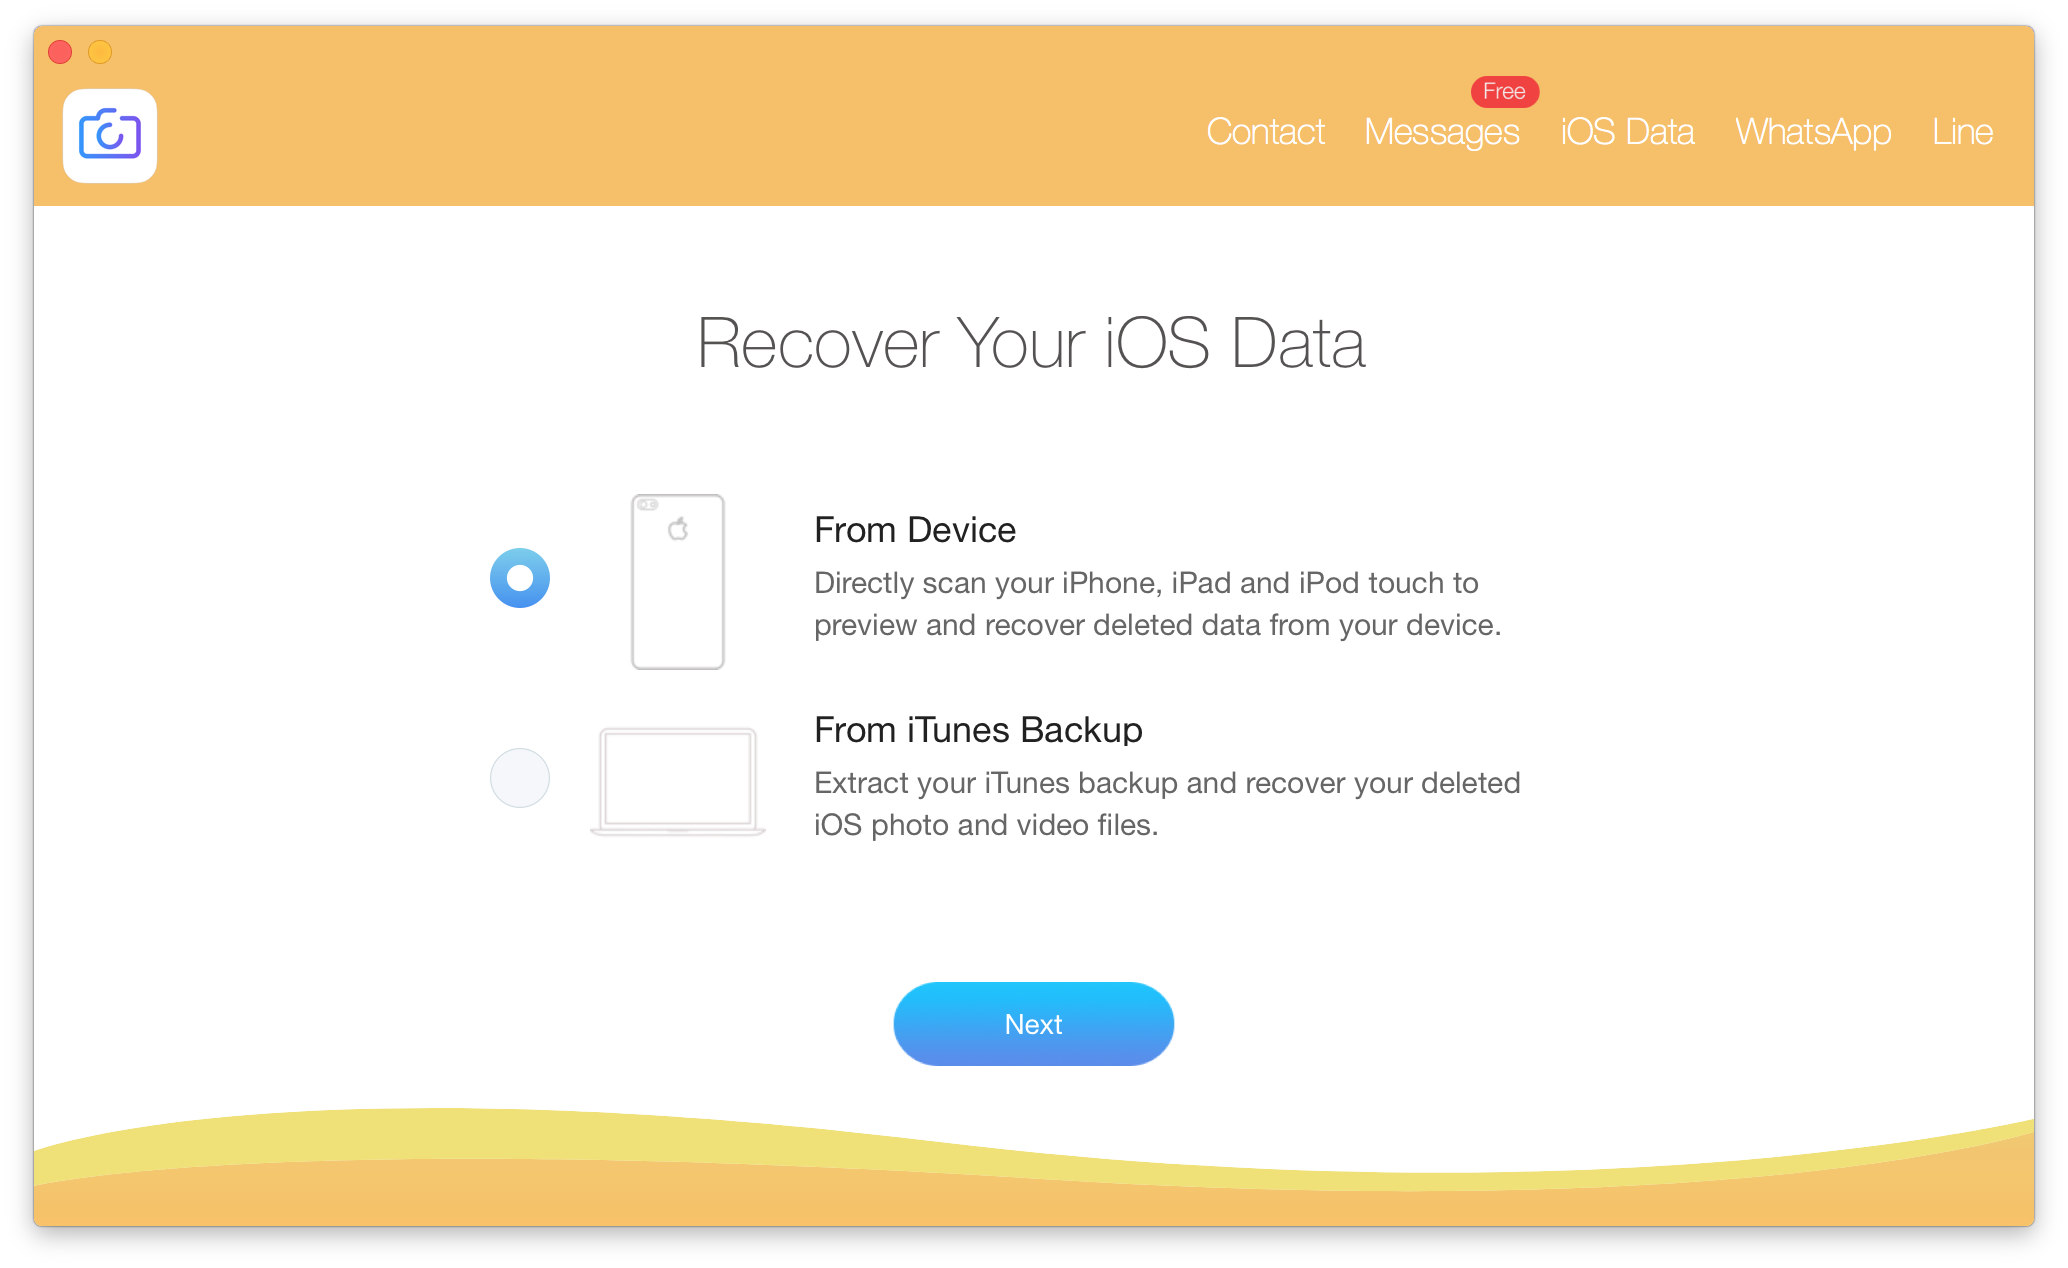 [FREE] iPhone Photo Recovery - Retrieve Your Deleted iPhone Photos on